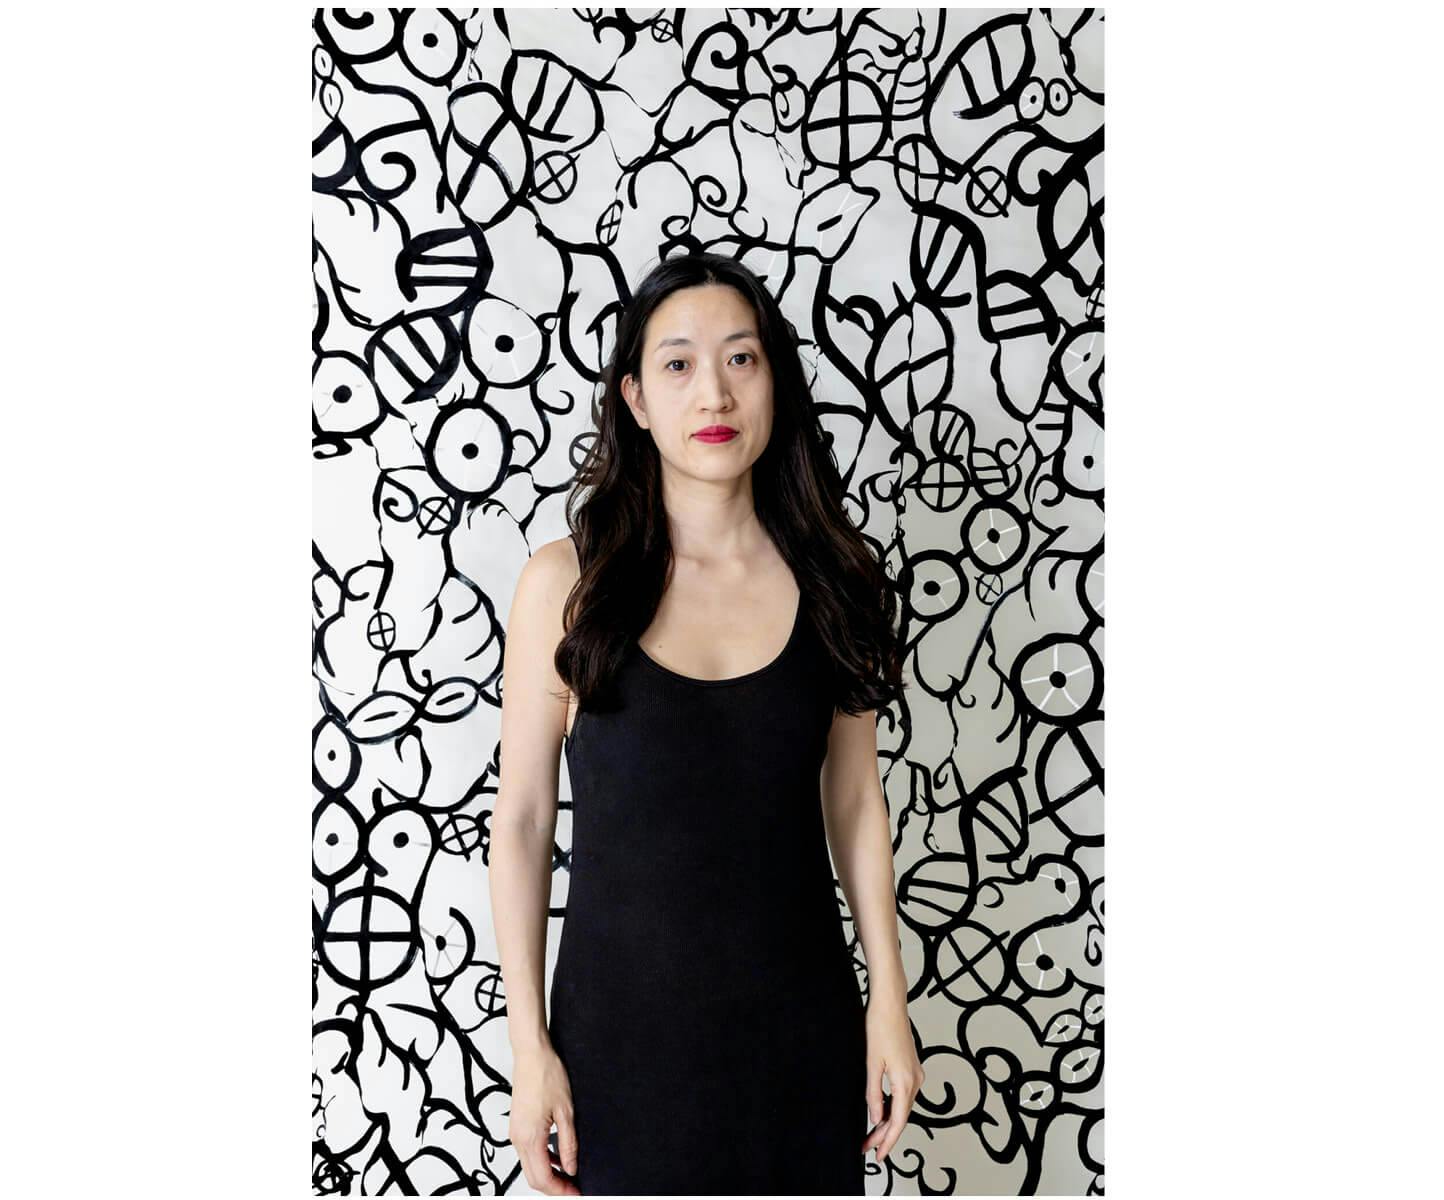 Jocelyn Shu wears black, standing in front of a patterned black and white background.